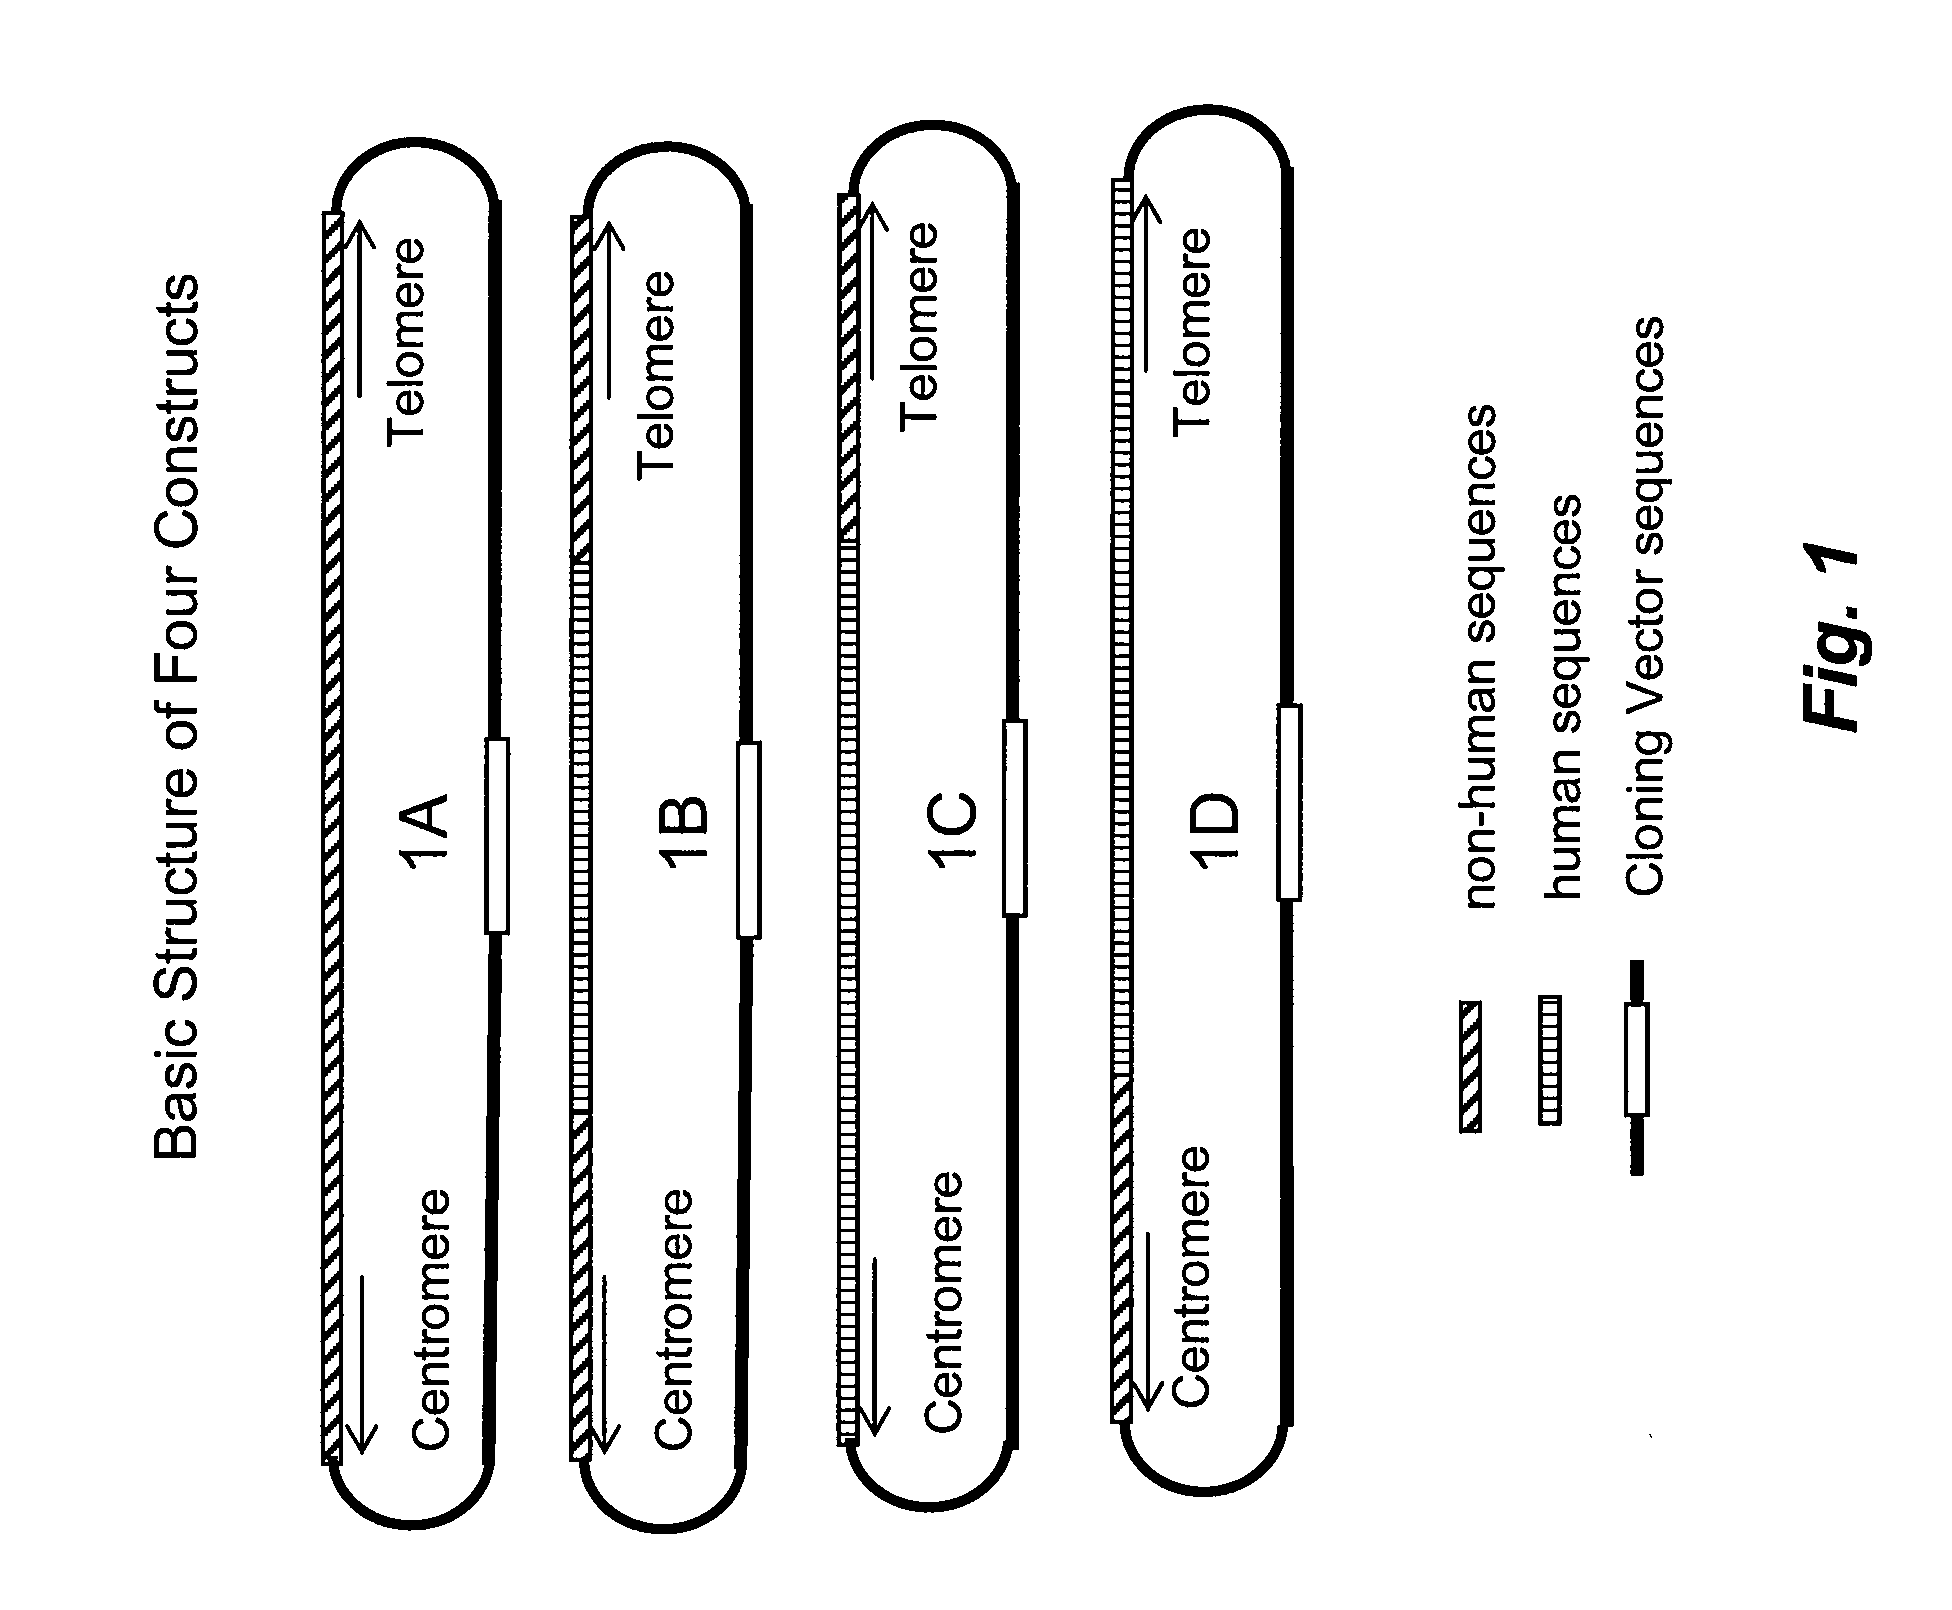 Methods for sequential replacement of targeted region by homologous recombination